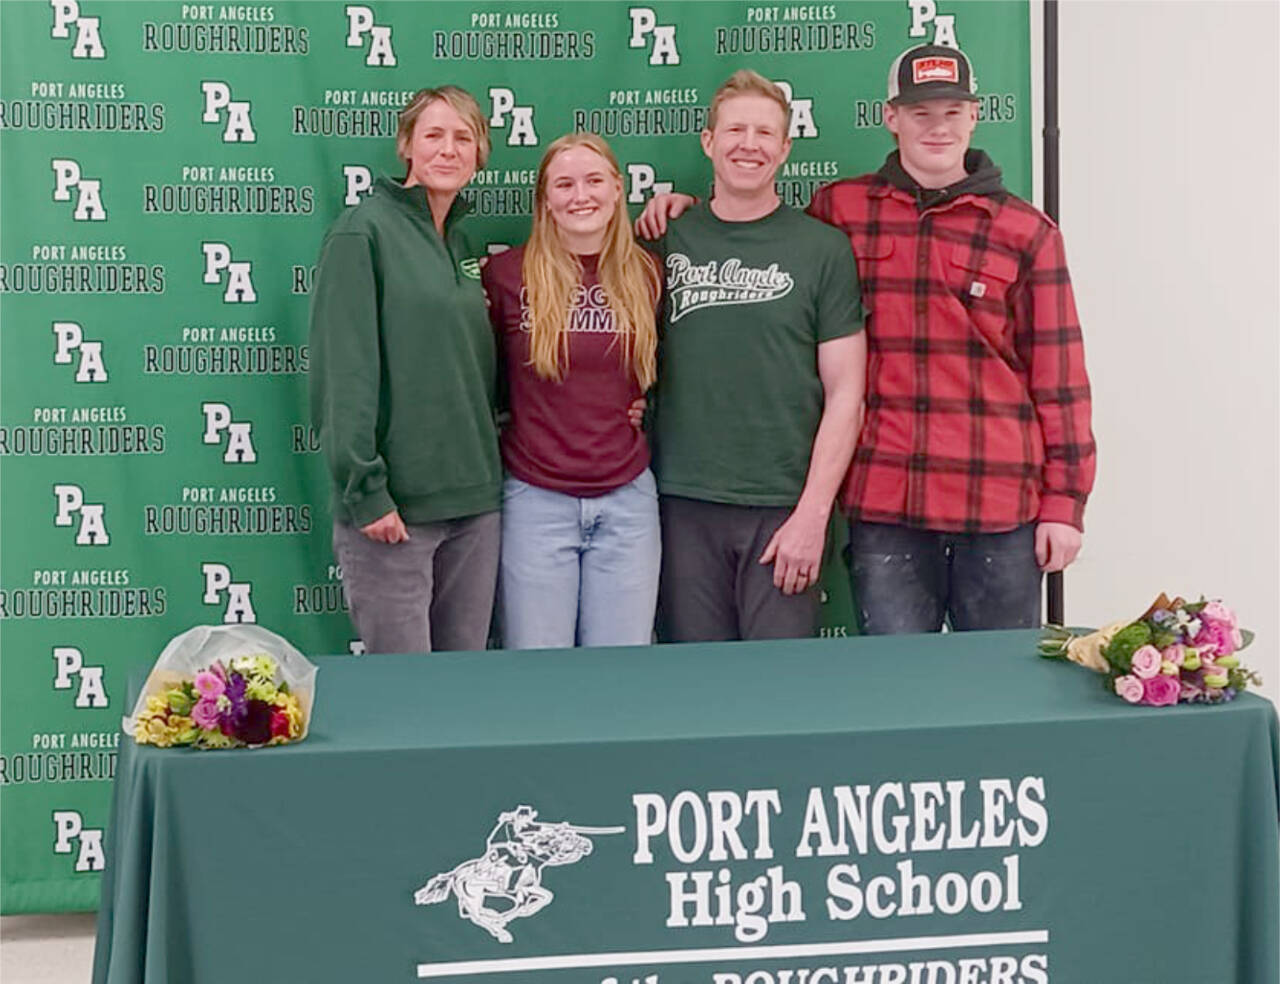 Port Angeles’ Harper McGuire, a district champion in the 200 freestyle and 500 freestyle, signed Wednesday to swim for the University of Puget Sound. From left are mother Karry McGuire, Harper McGuire, father Michael McGuire and brother Ronan McGuire. (Pierre LaBossiere/Peninsula Daily News)